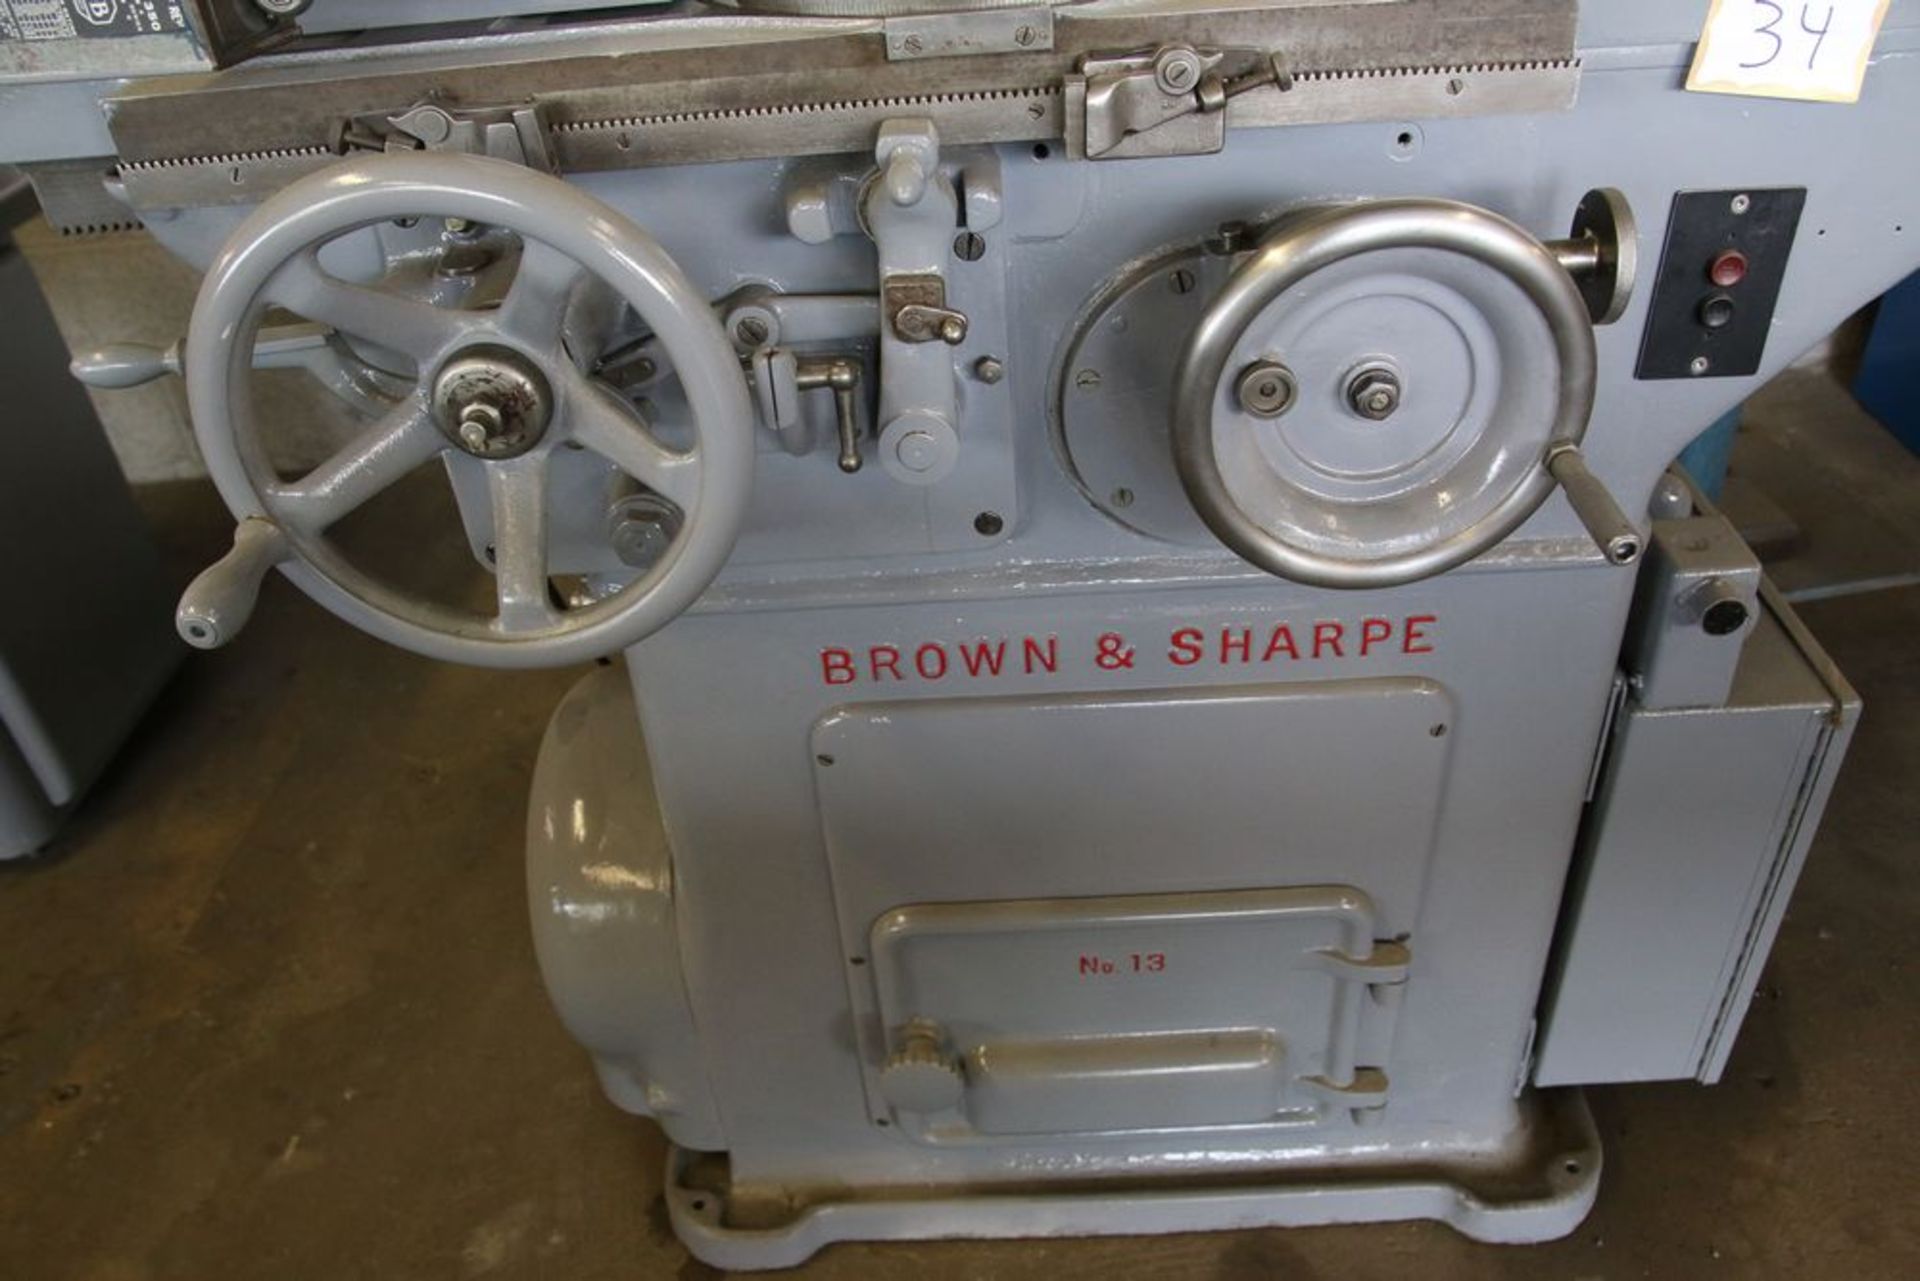 Brown & Sharpe No. 13 Universal Tool and Cutter Grinder - Image 4 of 5